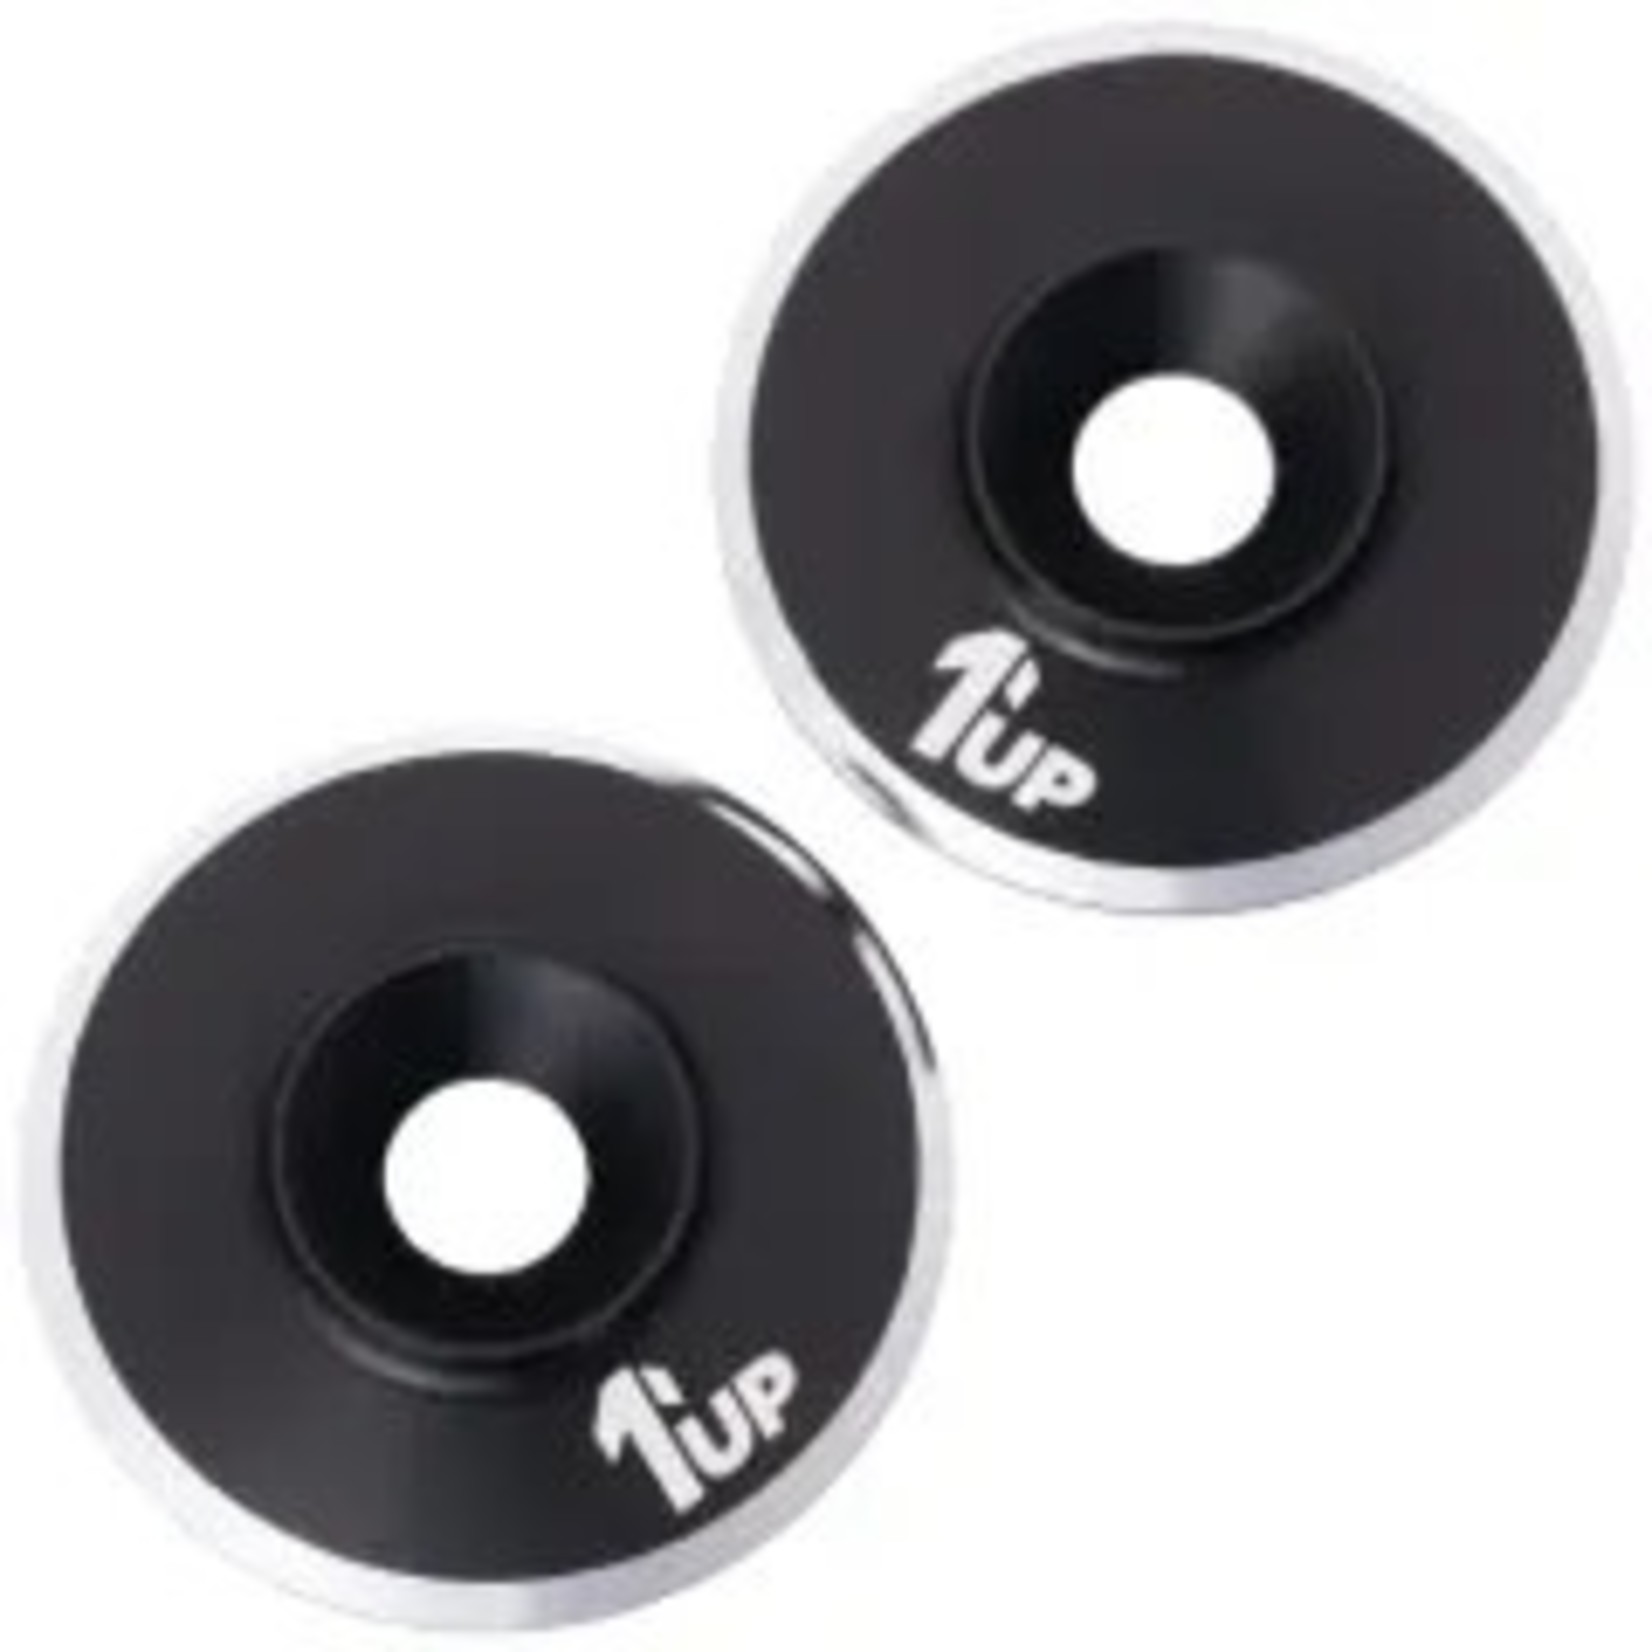 1UP 1UP820021 1Up Racing 7075 LowPro Wing Washers - M3 - 2pcs - Black Shine